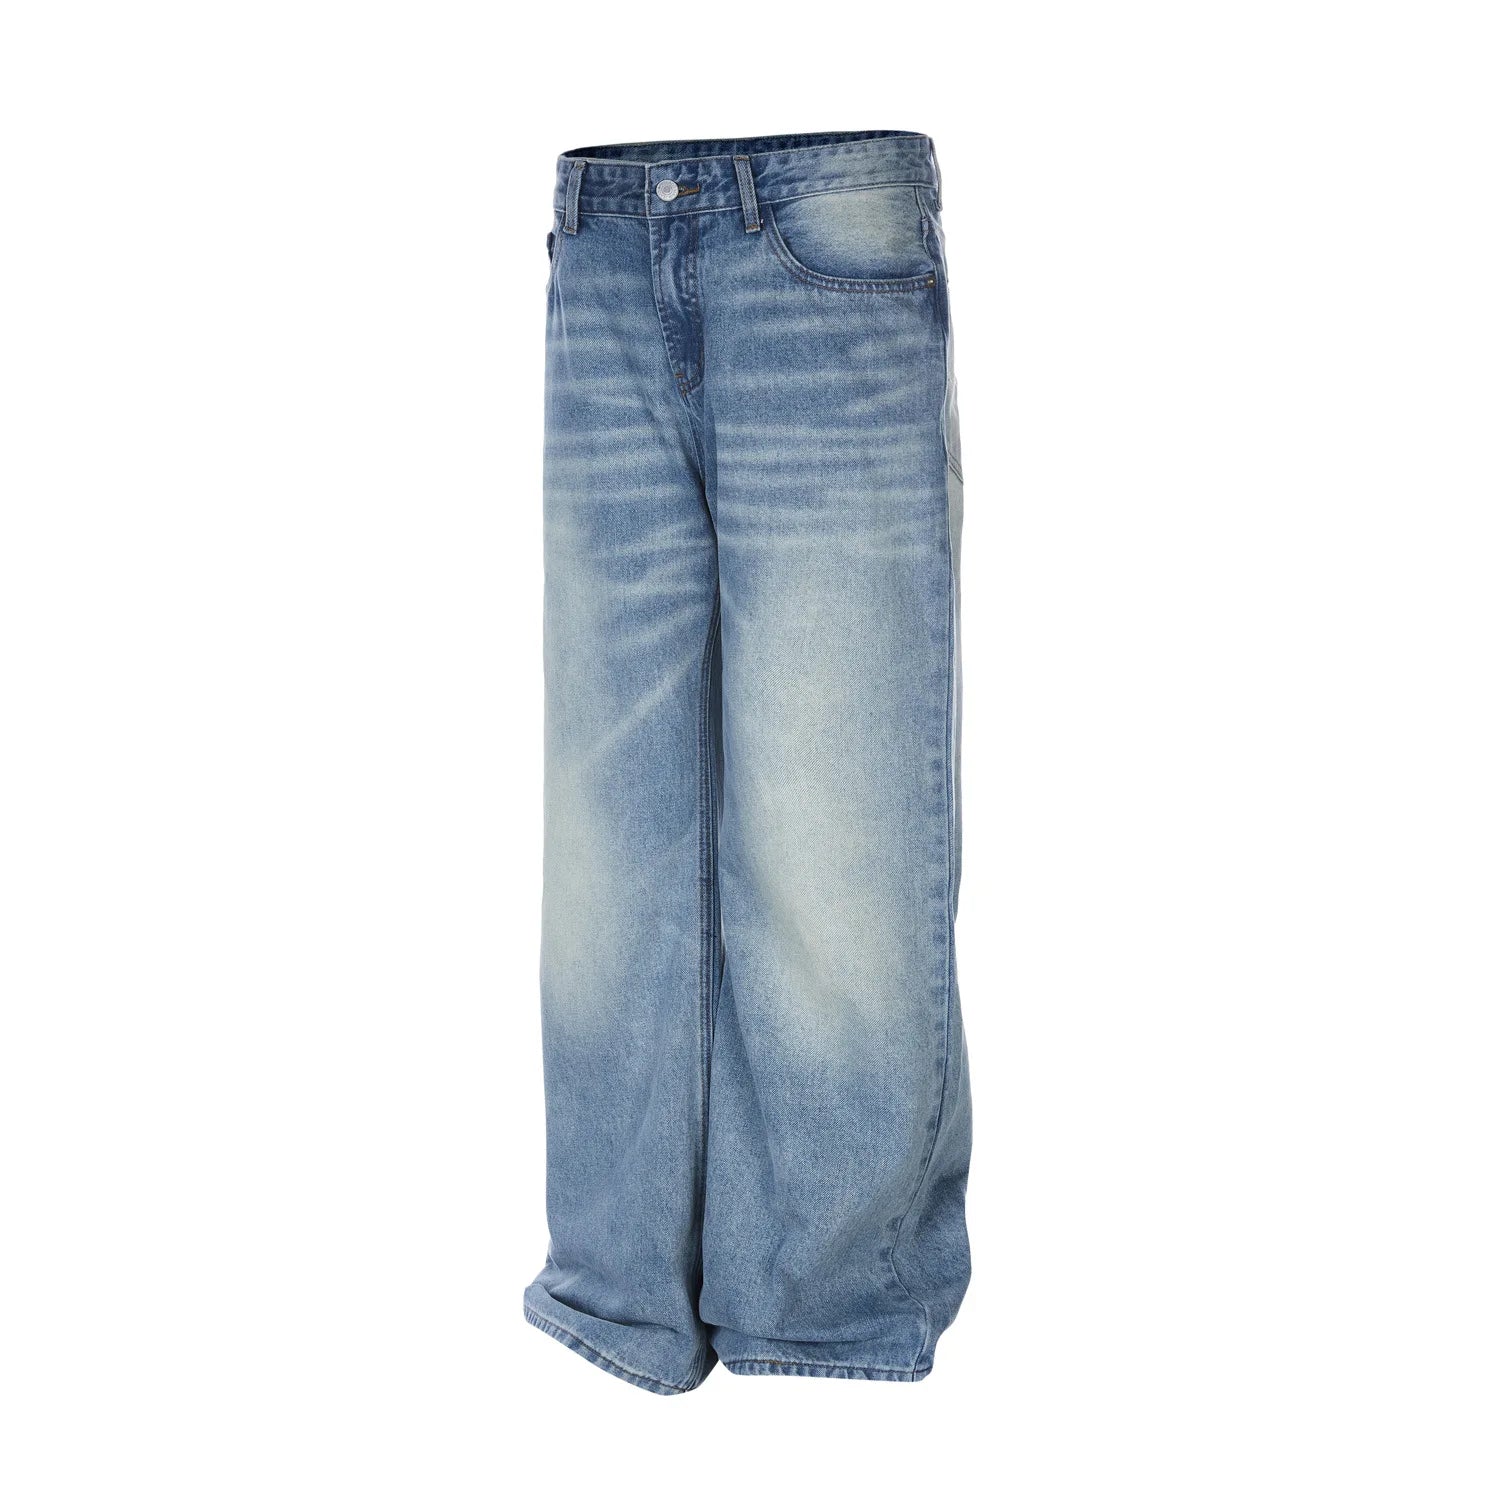 Haruja - Washed Cat Whiskers Jeans - streetwear jeans